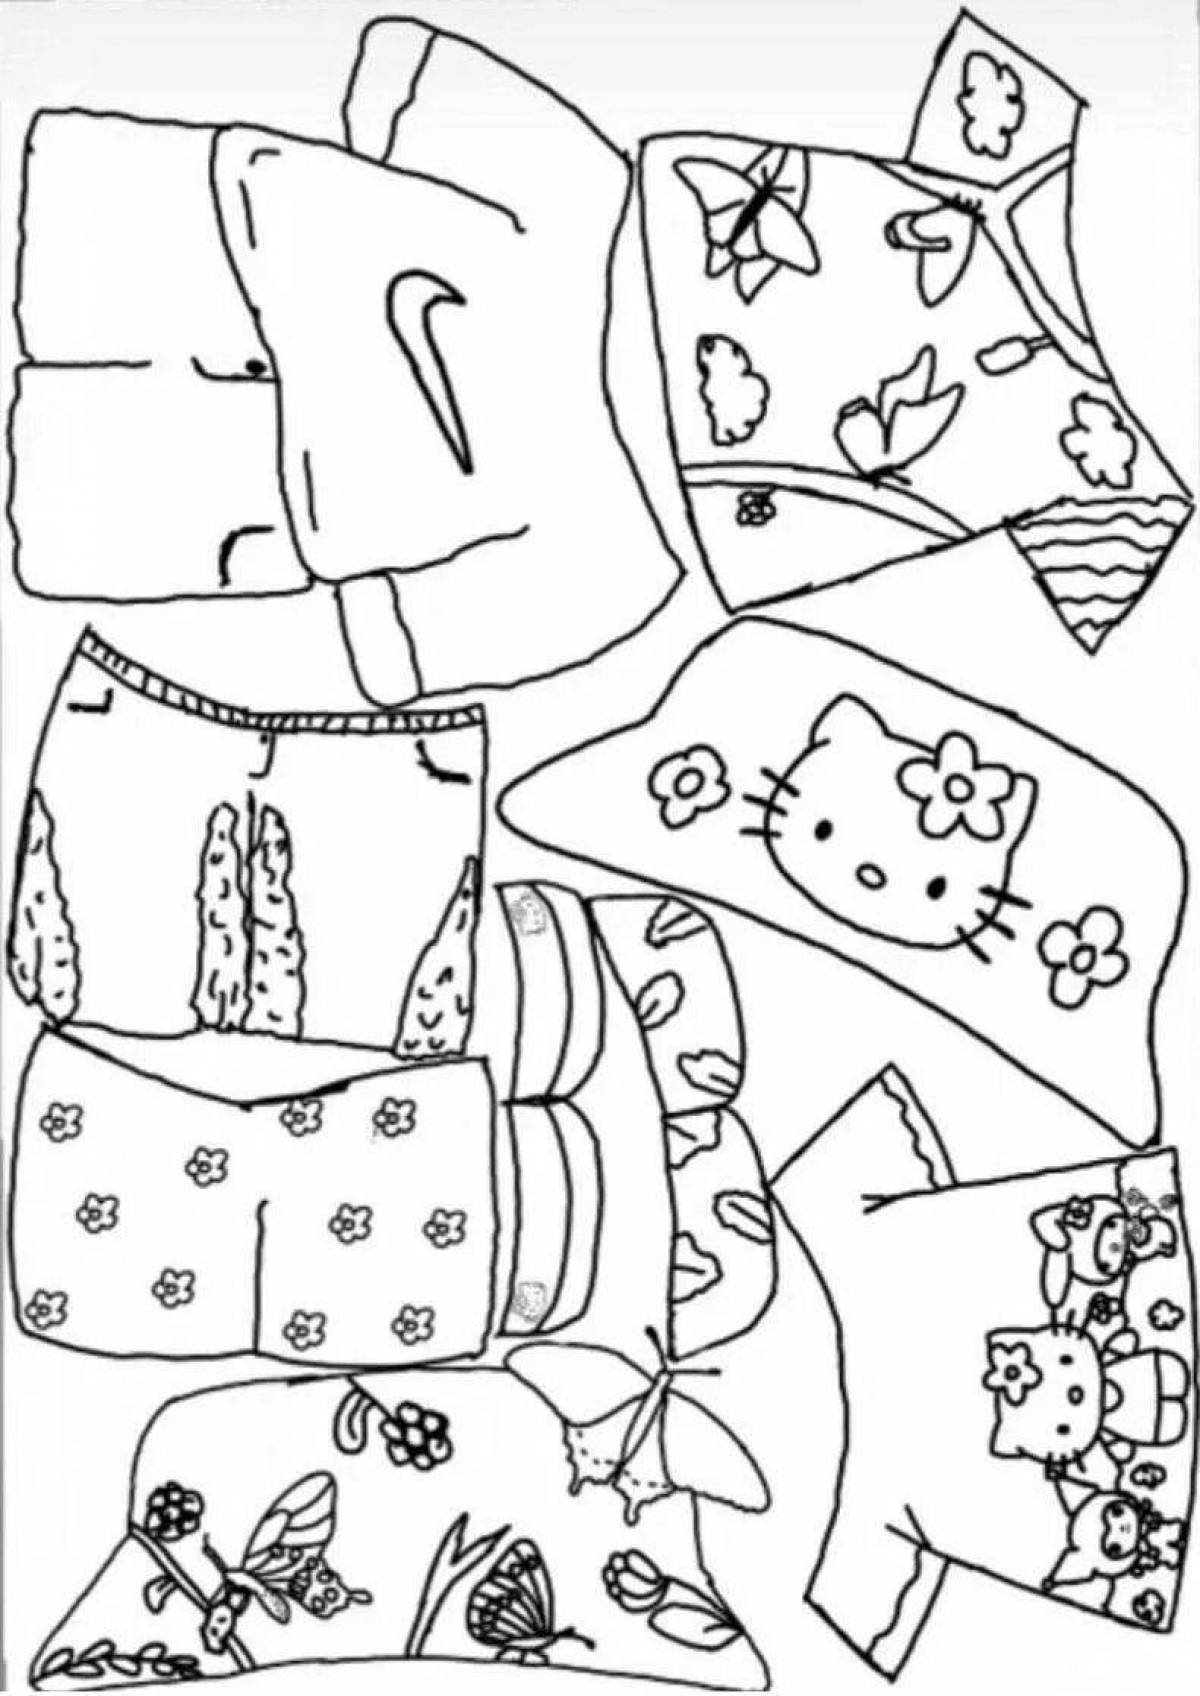 Lalafanfan paper duck dazzling clothes coloring page